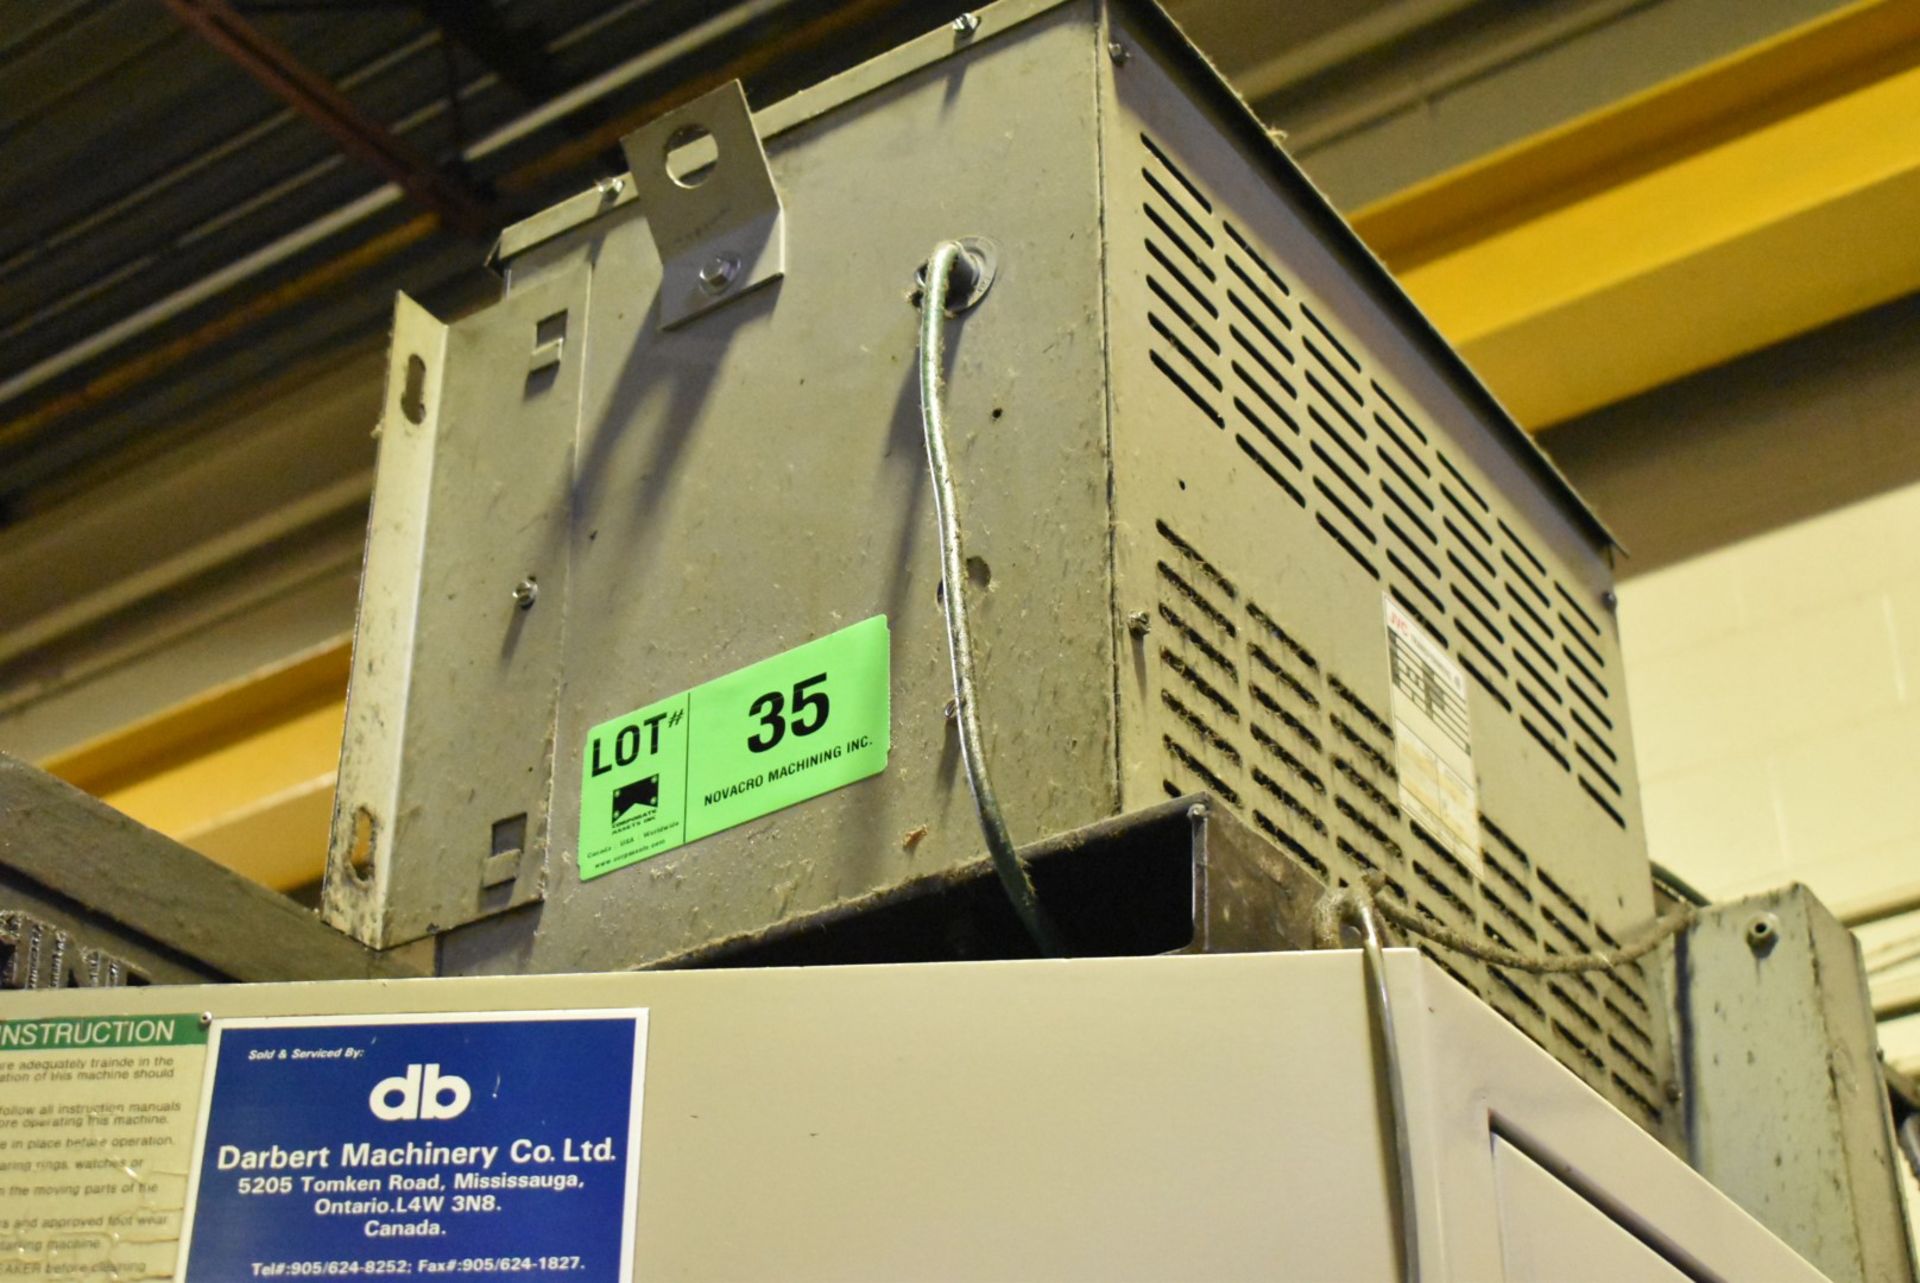 45KVA TRANSFORMER (CI) [RIGGING FEE FOR LOT#35 - $85 USD PLUS APPLICABLE TAXES]